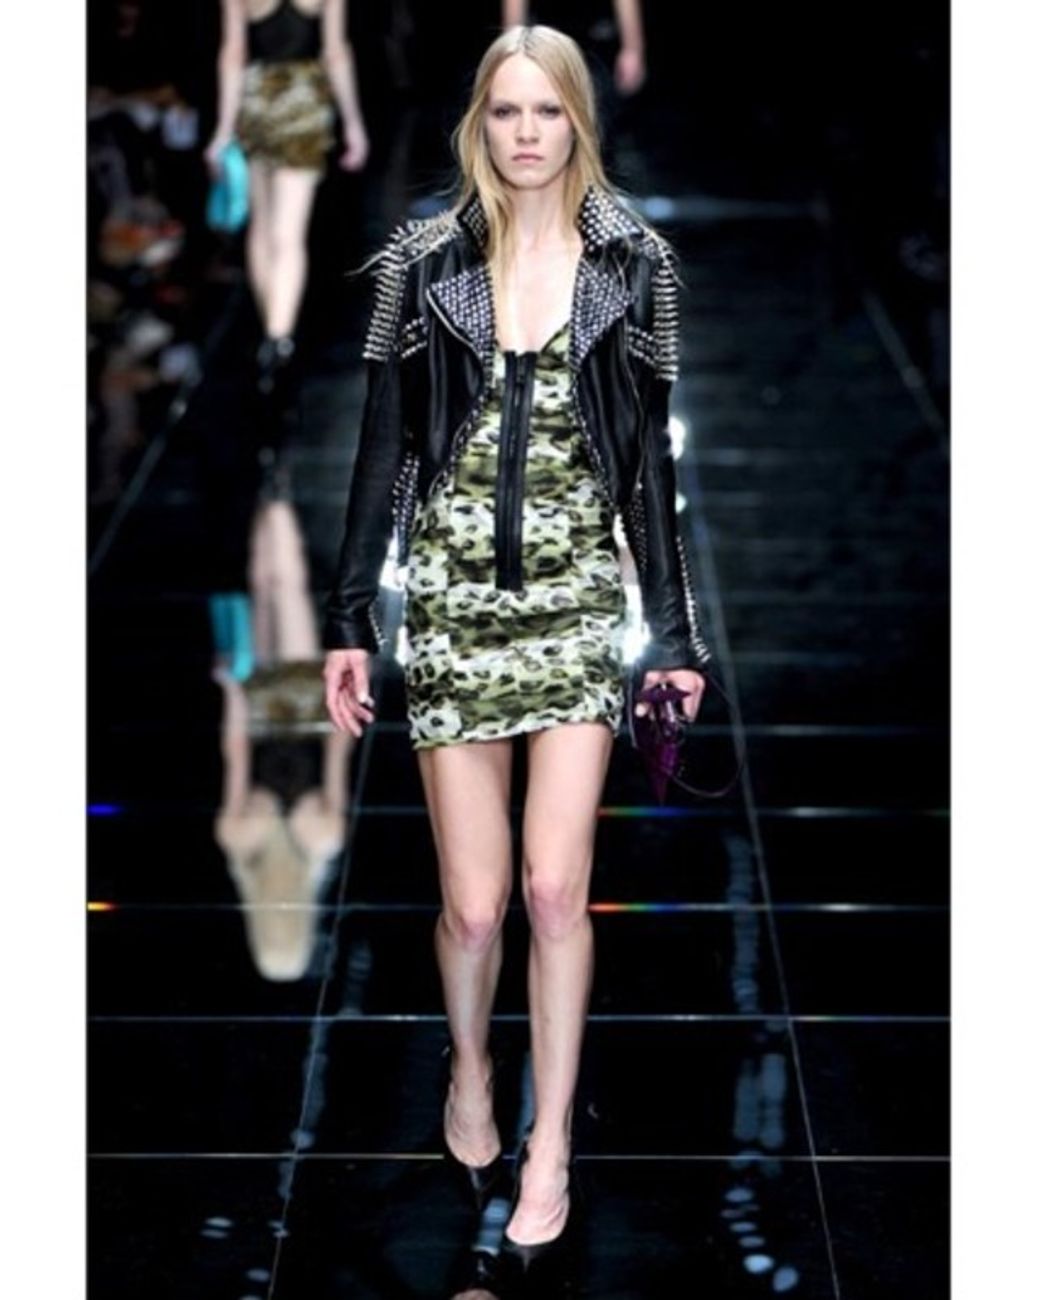 Burberry Prorsum Studded Leather Jacket in Black | Lyst